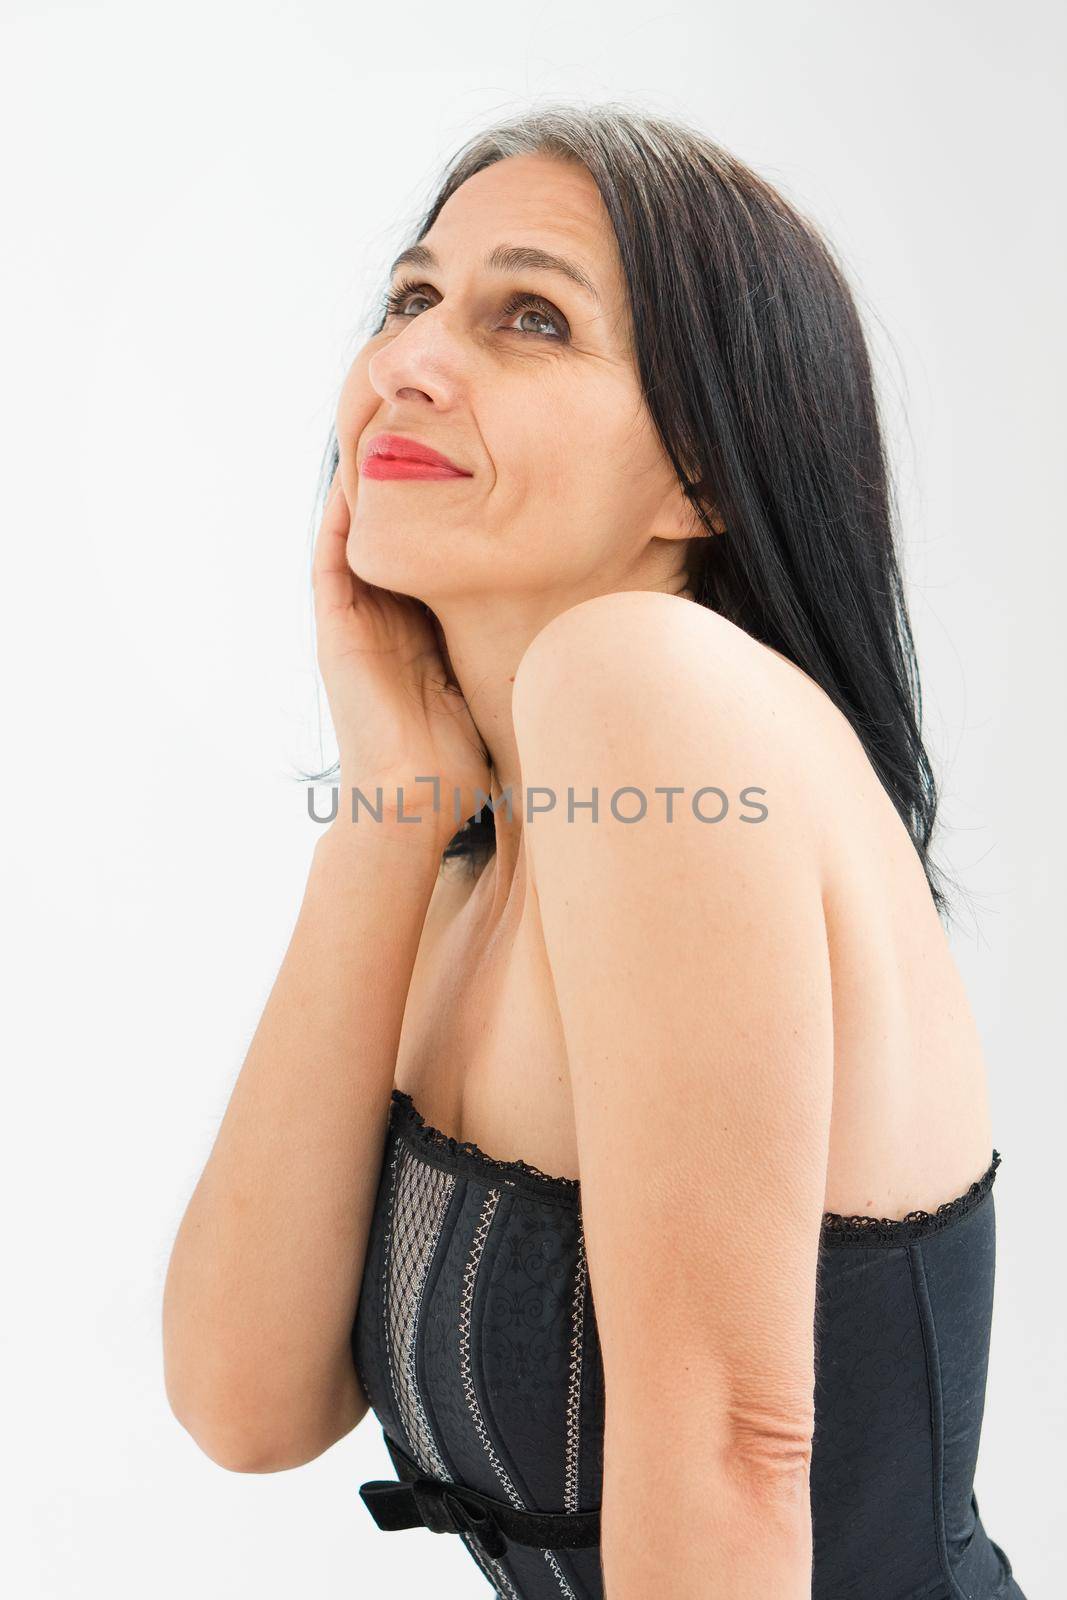 Studio photo of middle aged woman starting getting grey-haired wearing black and white clothes on white background, middle age sexy lady, happy life concept.